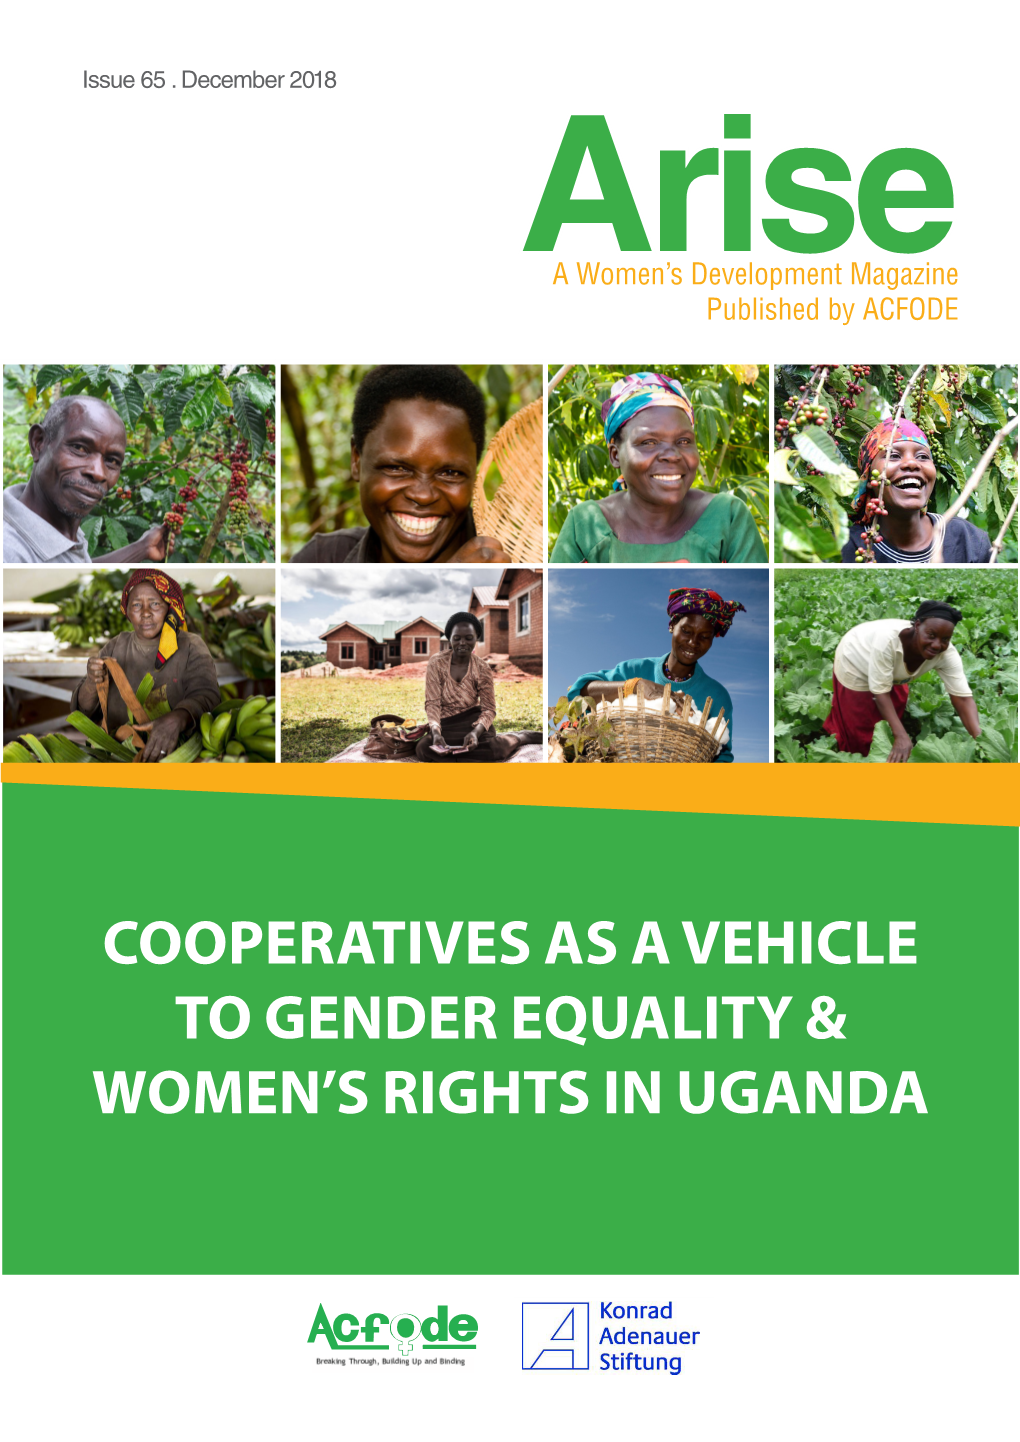 Cooperatives As a Vehicle to Gender Equality & Women's